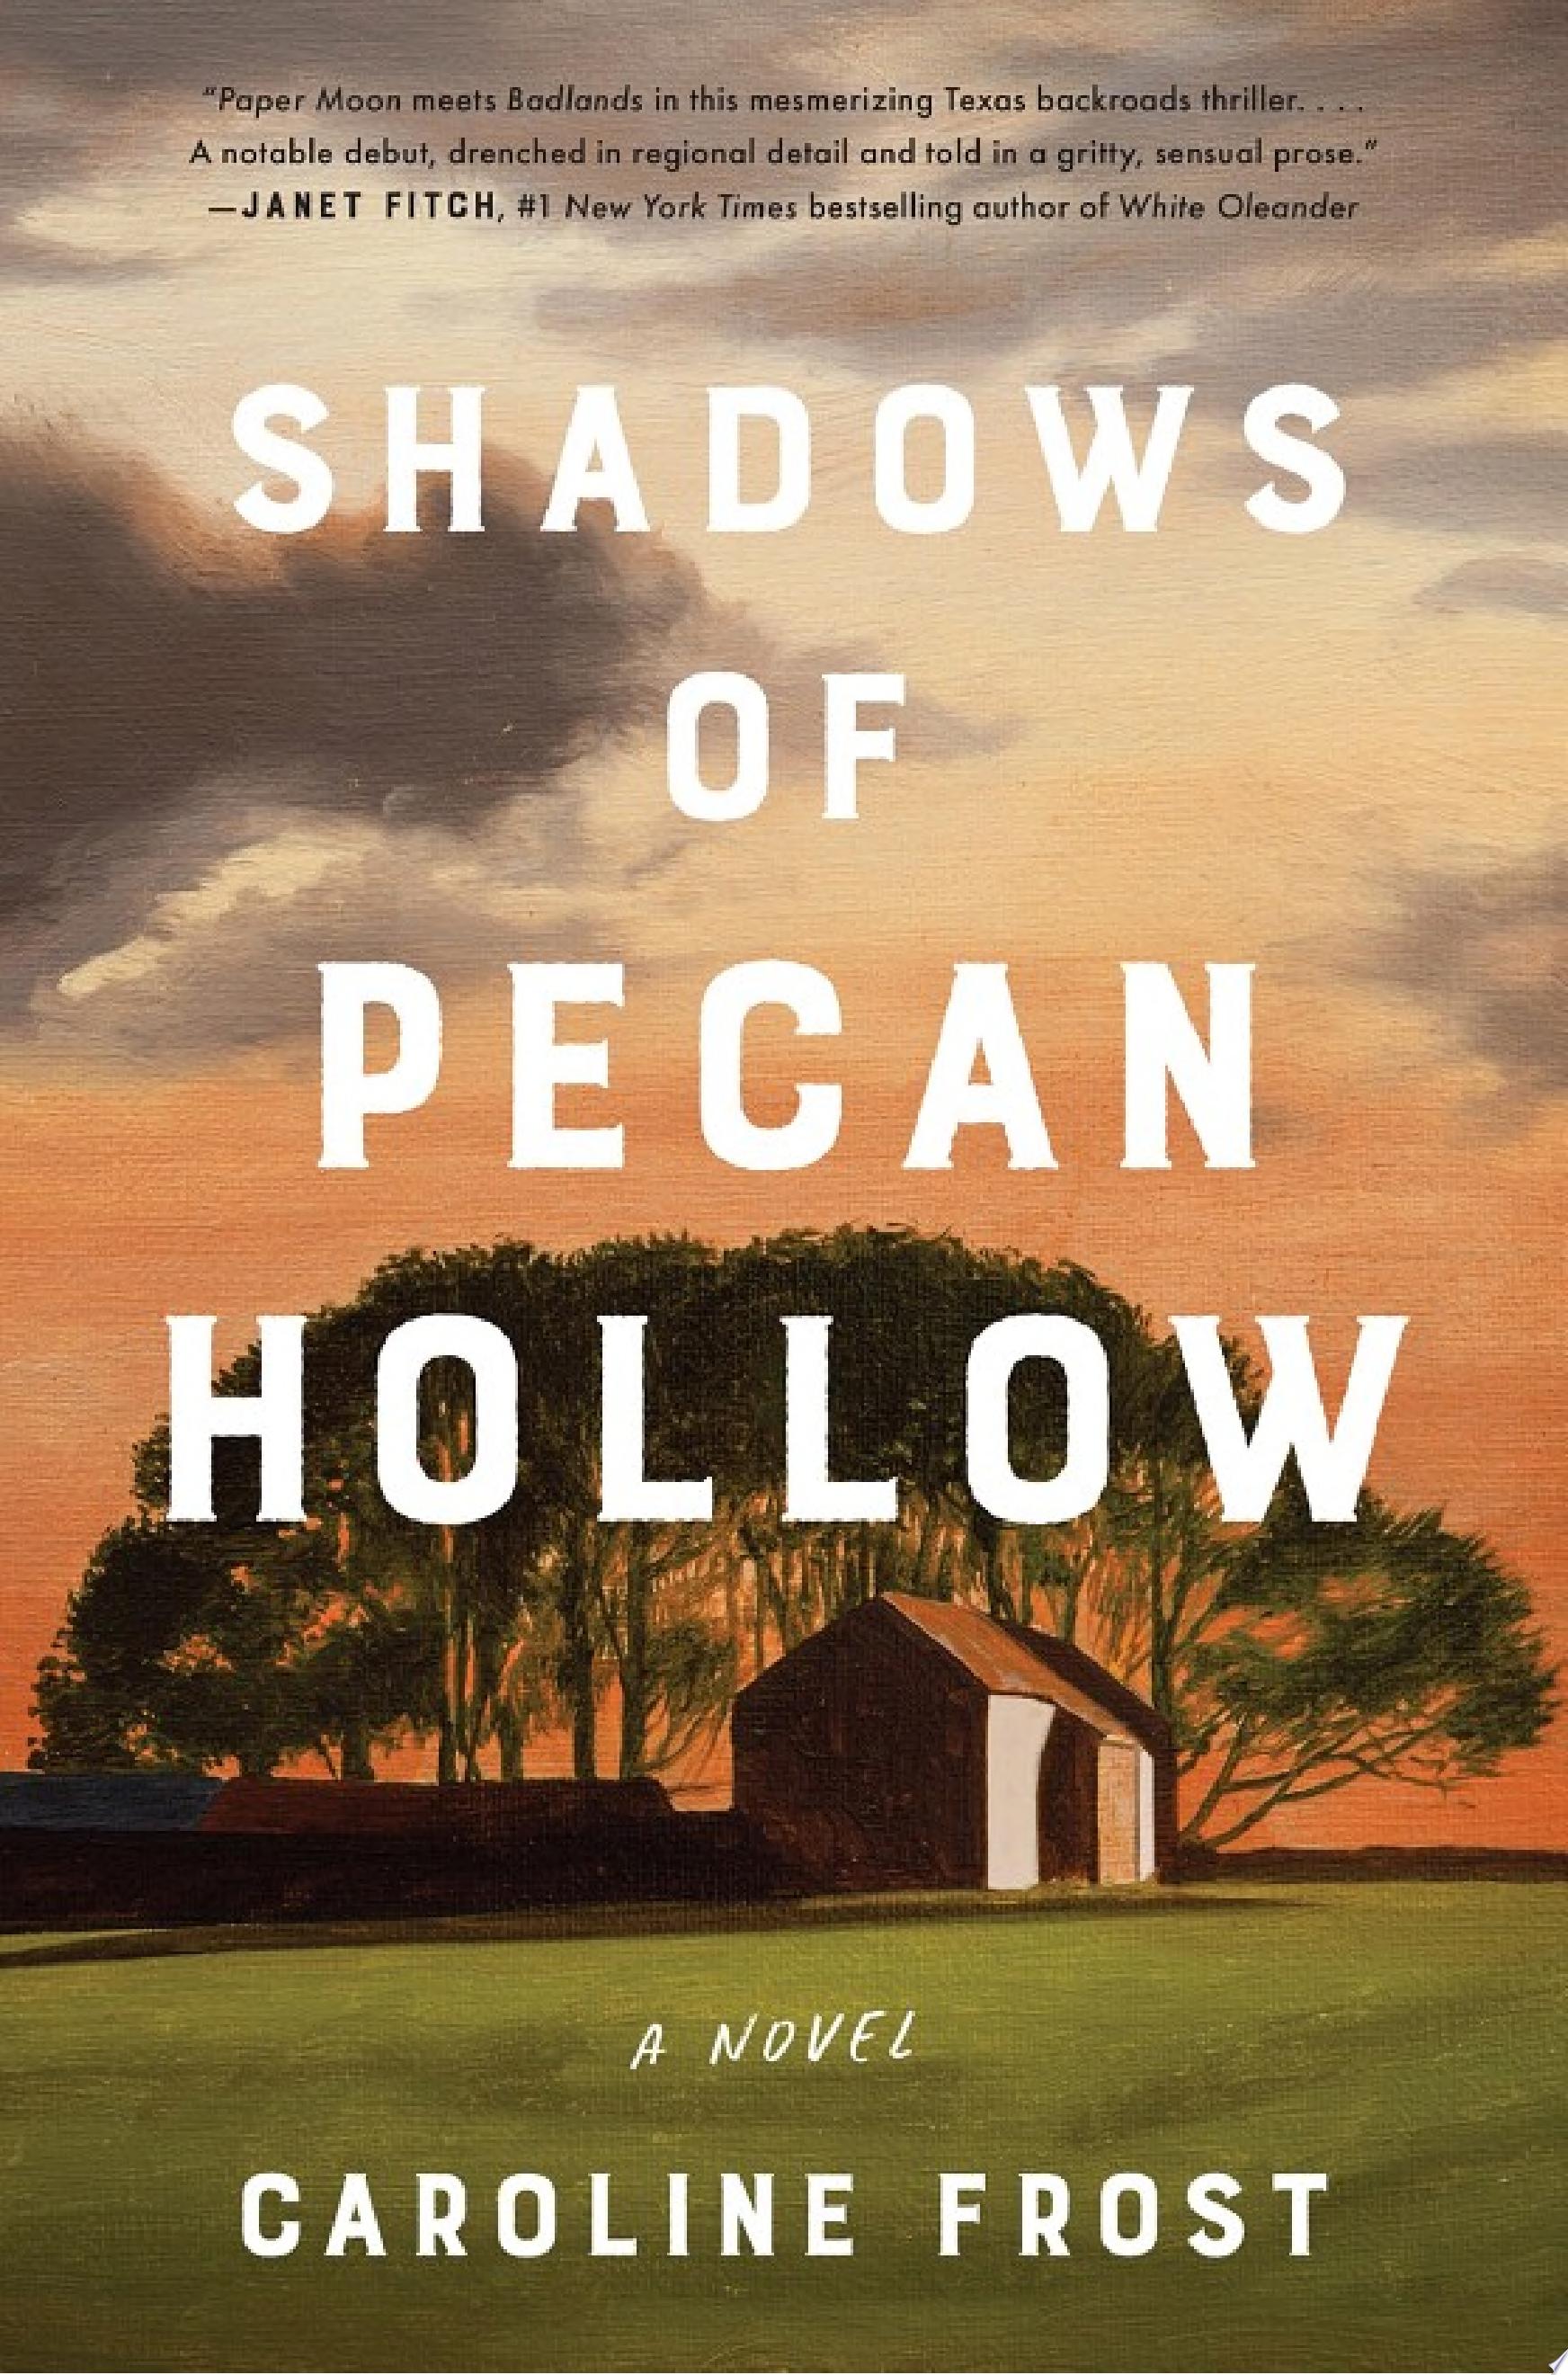 Image for "Shadows of Pecan Hollow"